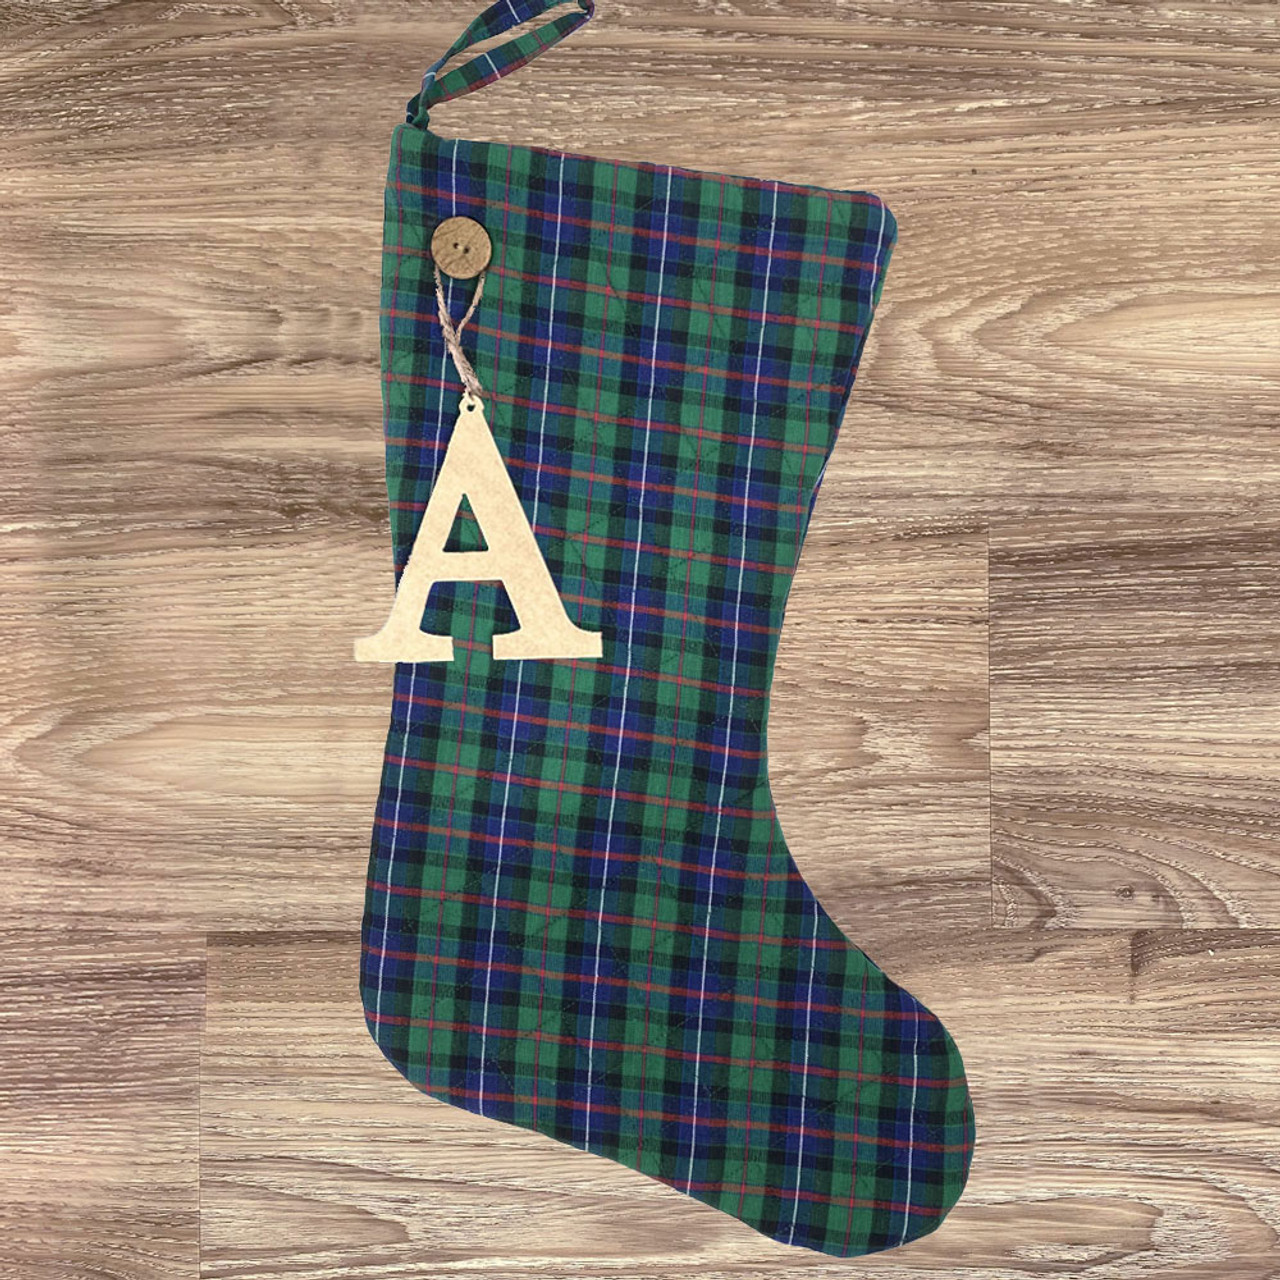 Celtic Blue Tartan Quilted Stocking with Personalized Letter Charm by Marilee Home